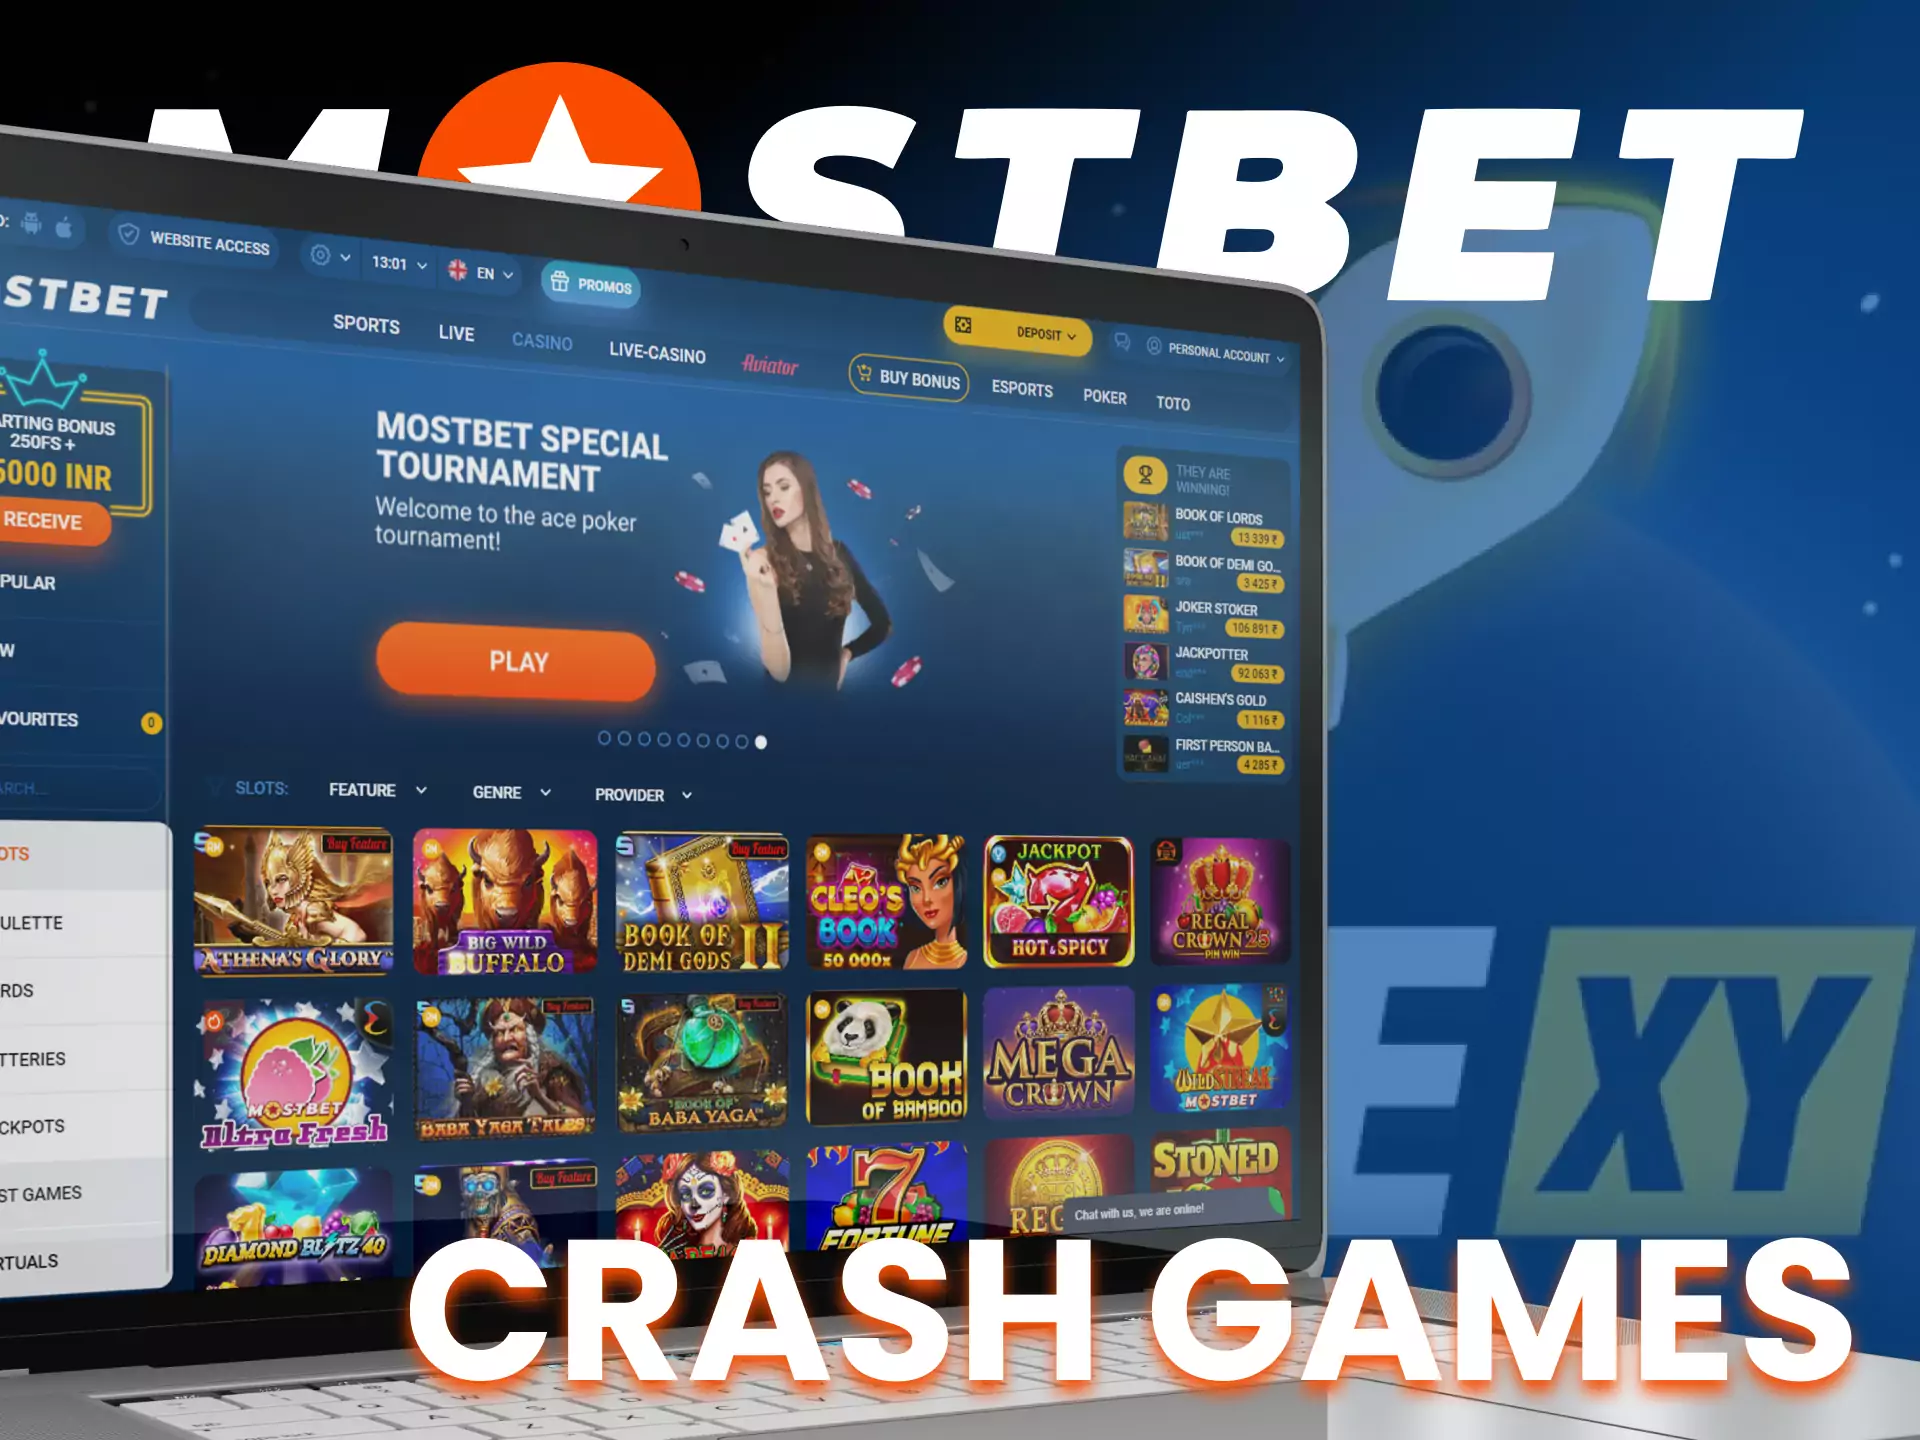 At Mostbet, try your luck at crash games.